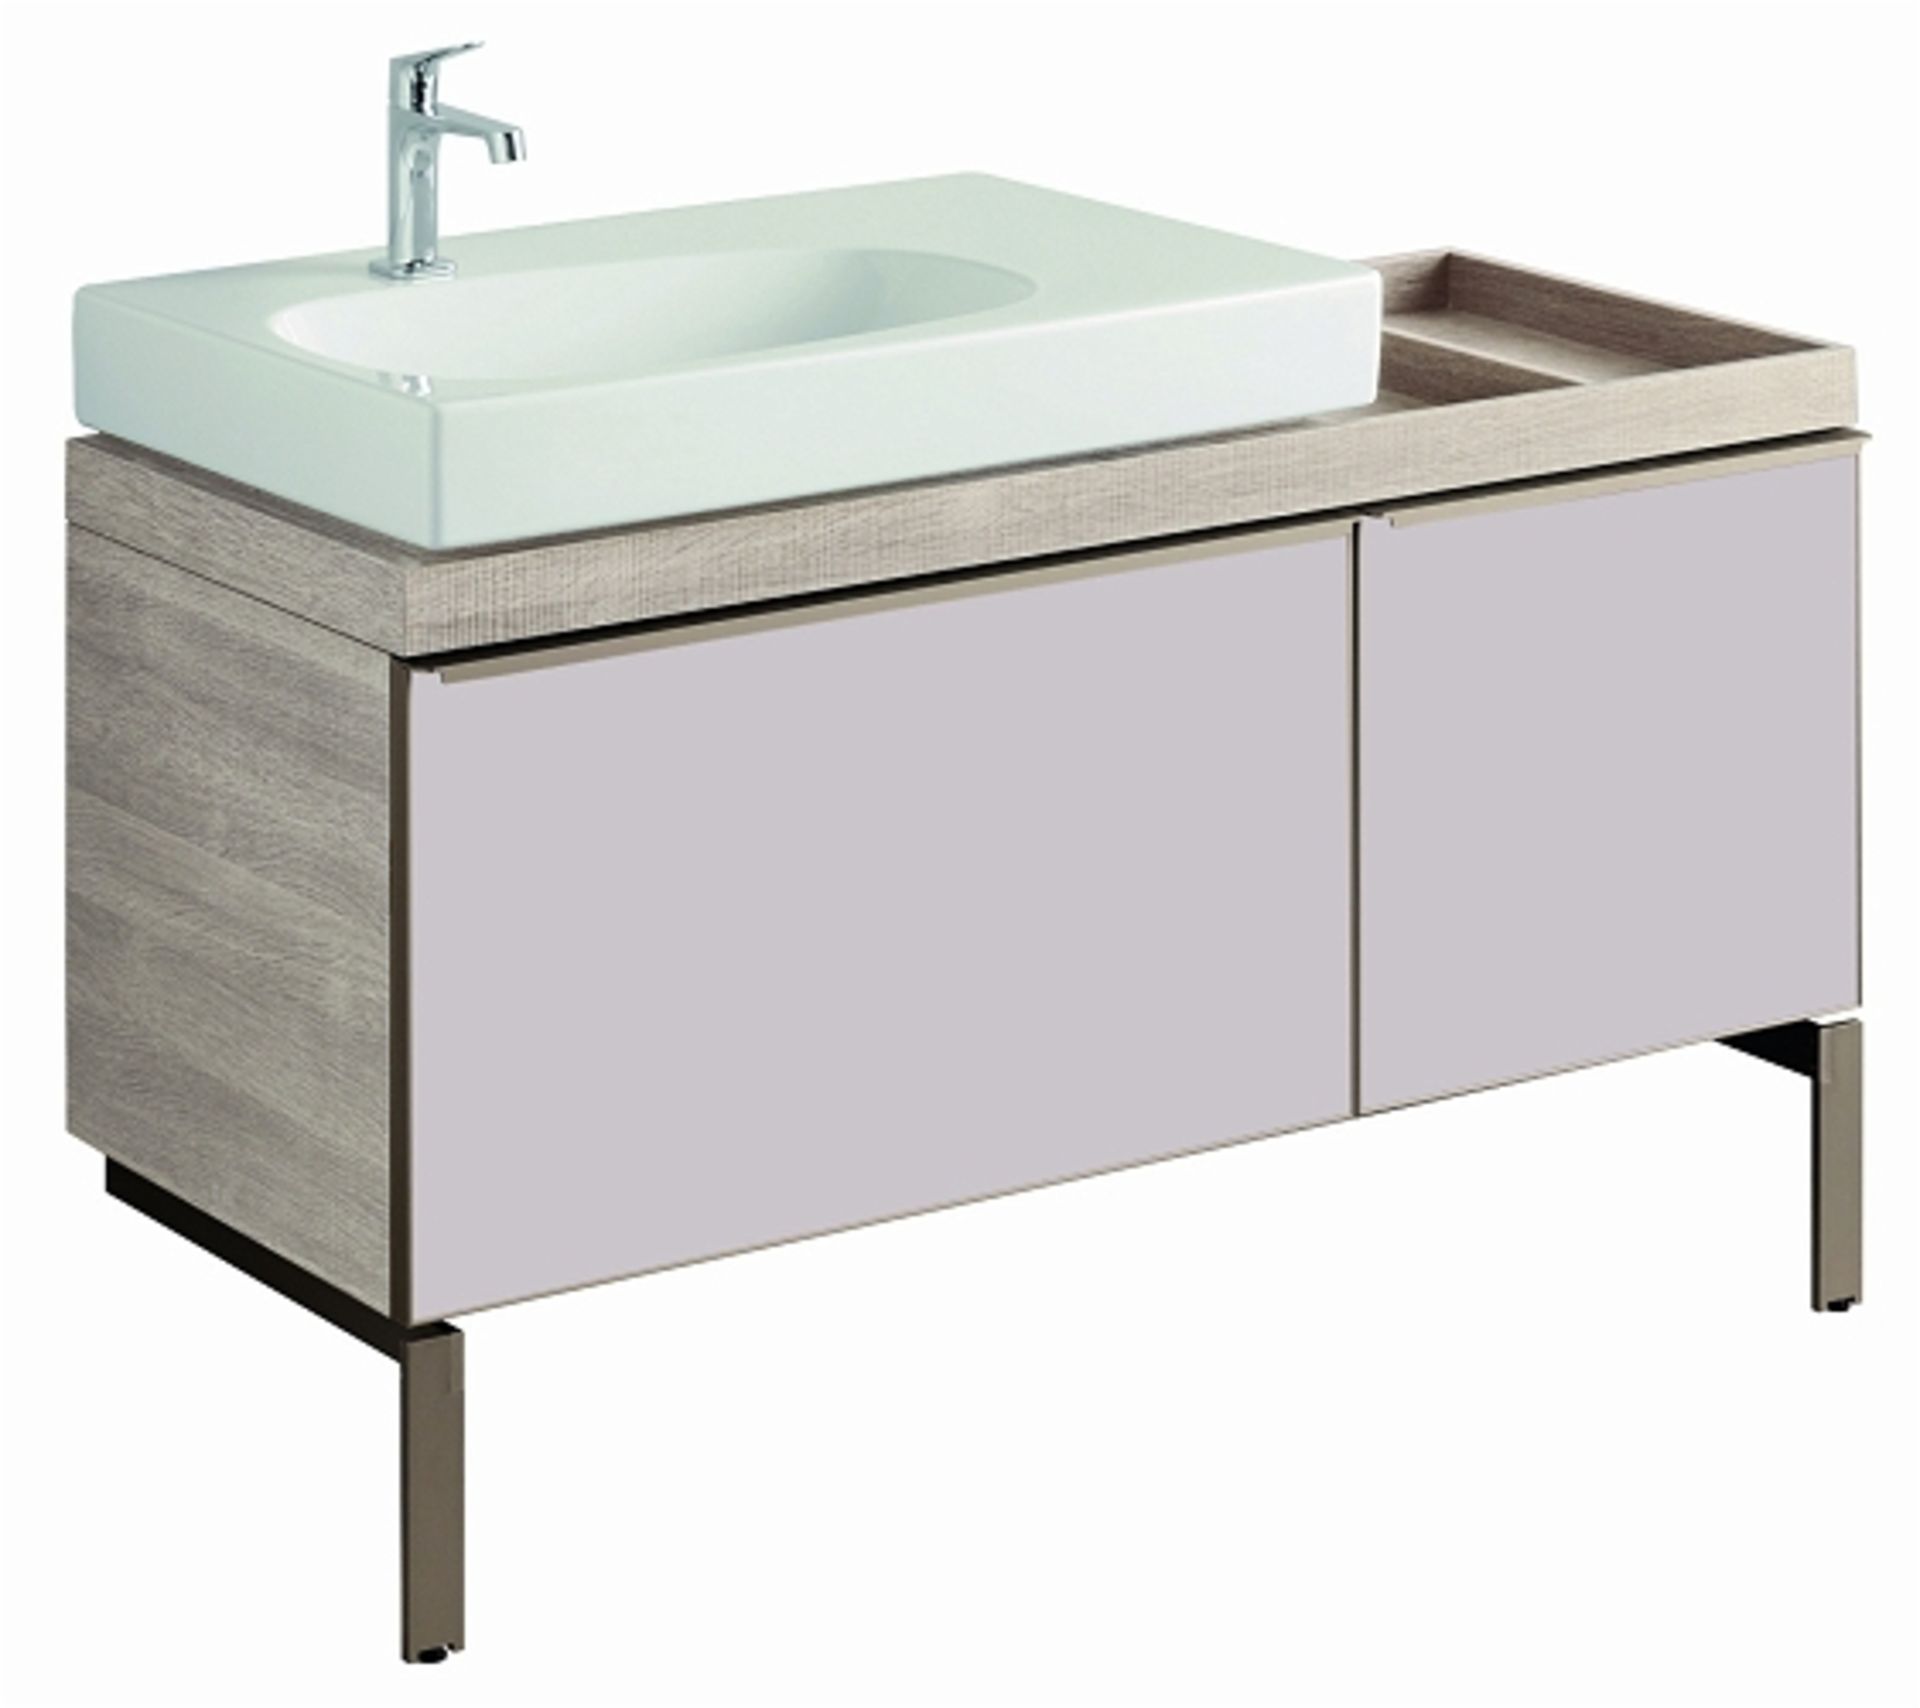 (XL9) 1200mm Geberit Citterio Vanity Unit With Drawer And RH Shelf 120cm. RRP £1,569.99. Comes... - Image 2 of 3